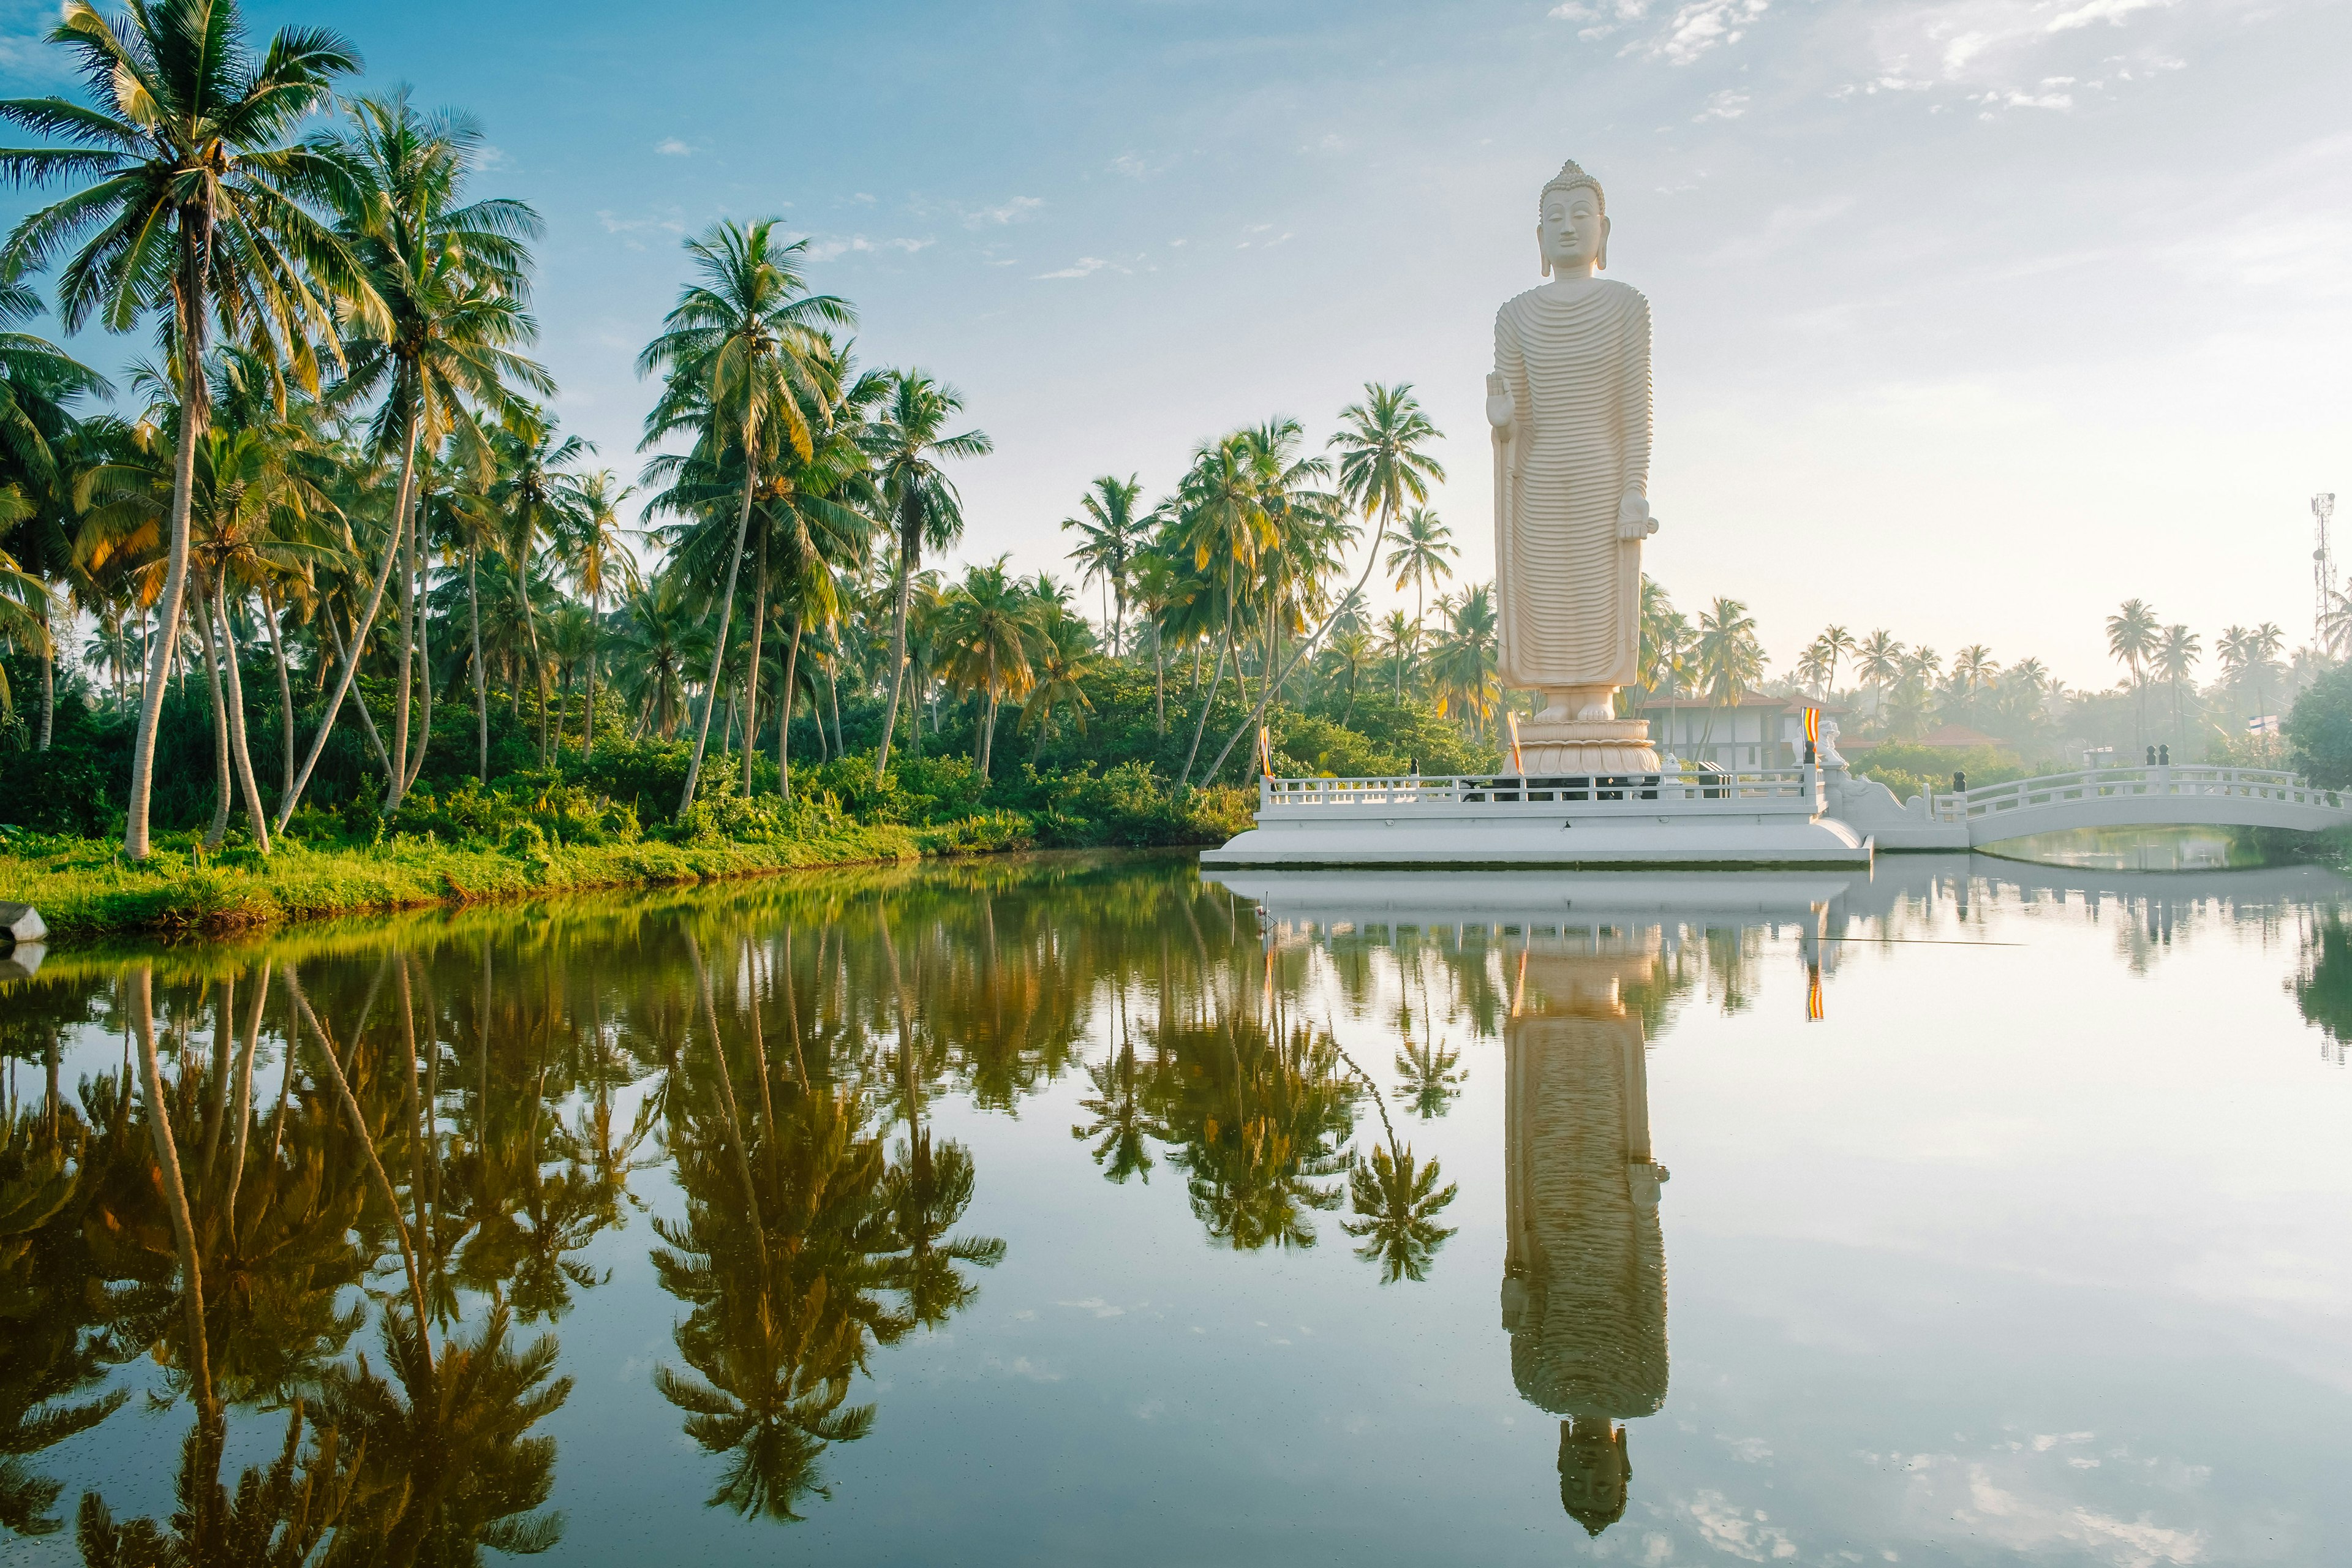 The Tusnami statue a tall white buddha on a white platform is perfectly reflected in the pool below and surrounded by palm trees in Sri Lanka